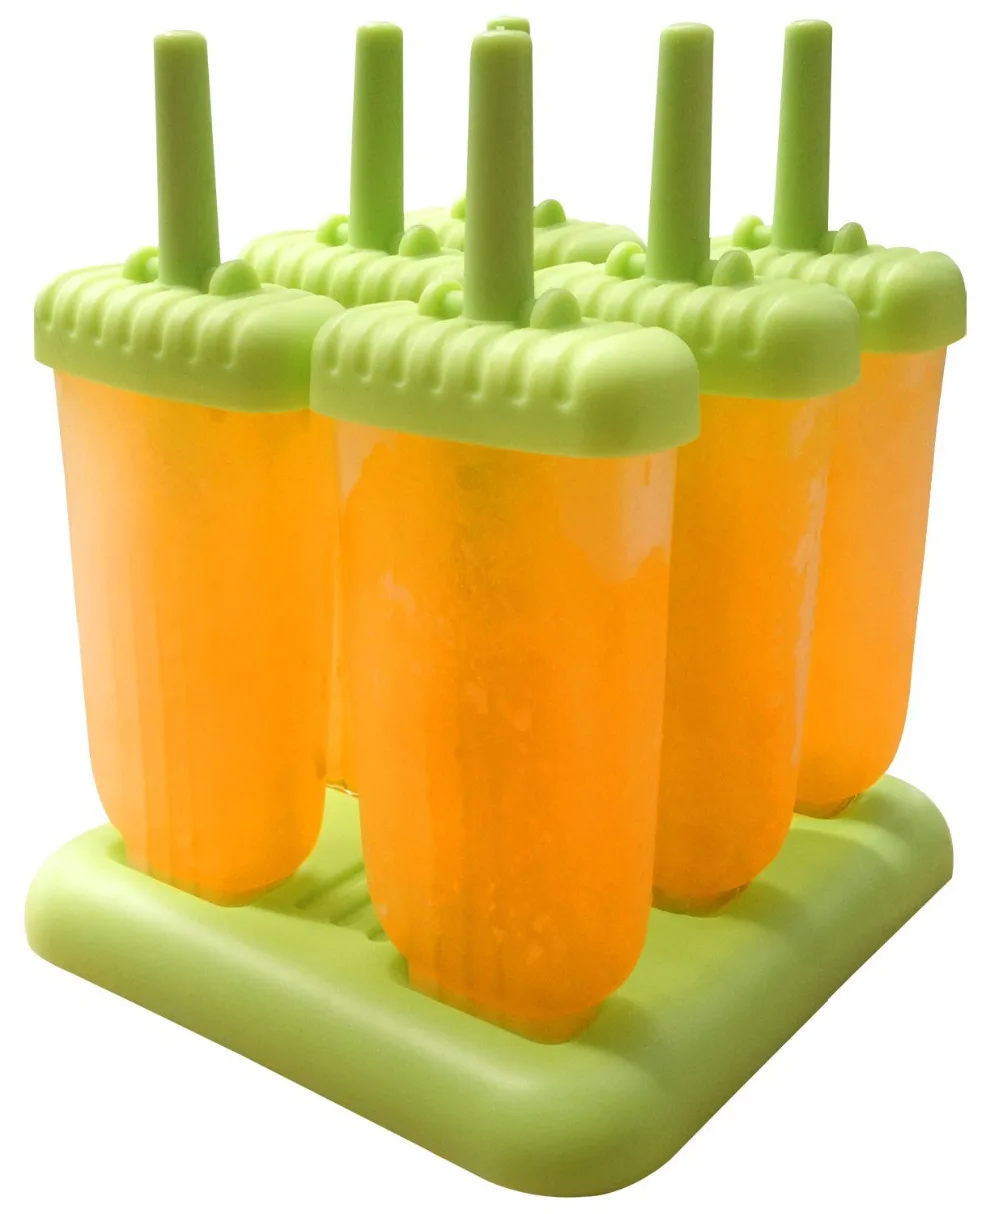 Plastic Popsicle Mold Tray Cream Mold Ice Tray Lolly Maker Frozen Mould Tool N7 